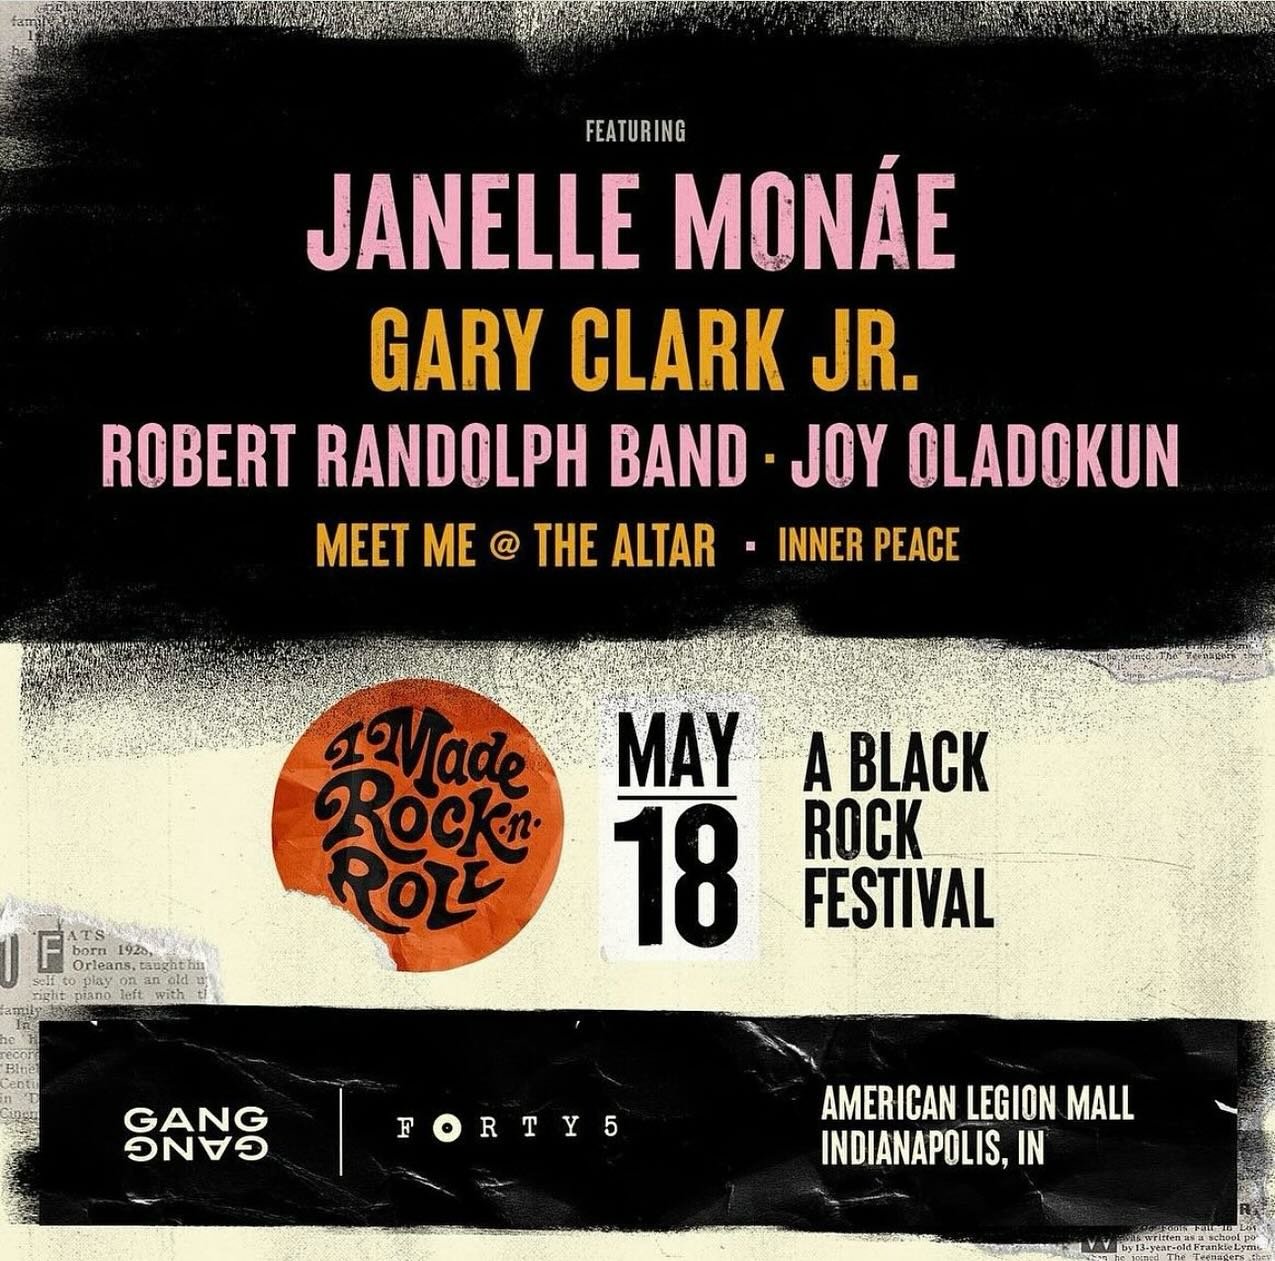 🤩SPECIAL DISCOUNT! @inpoc_ has teamed up with @forty5presents for an @imaderockandroll discount code to this year&rsquo;s A BLACK ROCK FESTIVAL! Enter code PRIDE before selecting your ticket for discount to apply.

Check out the video on how to get 